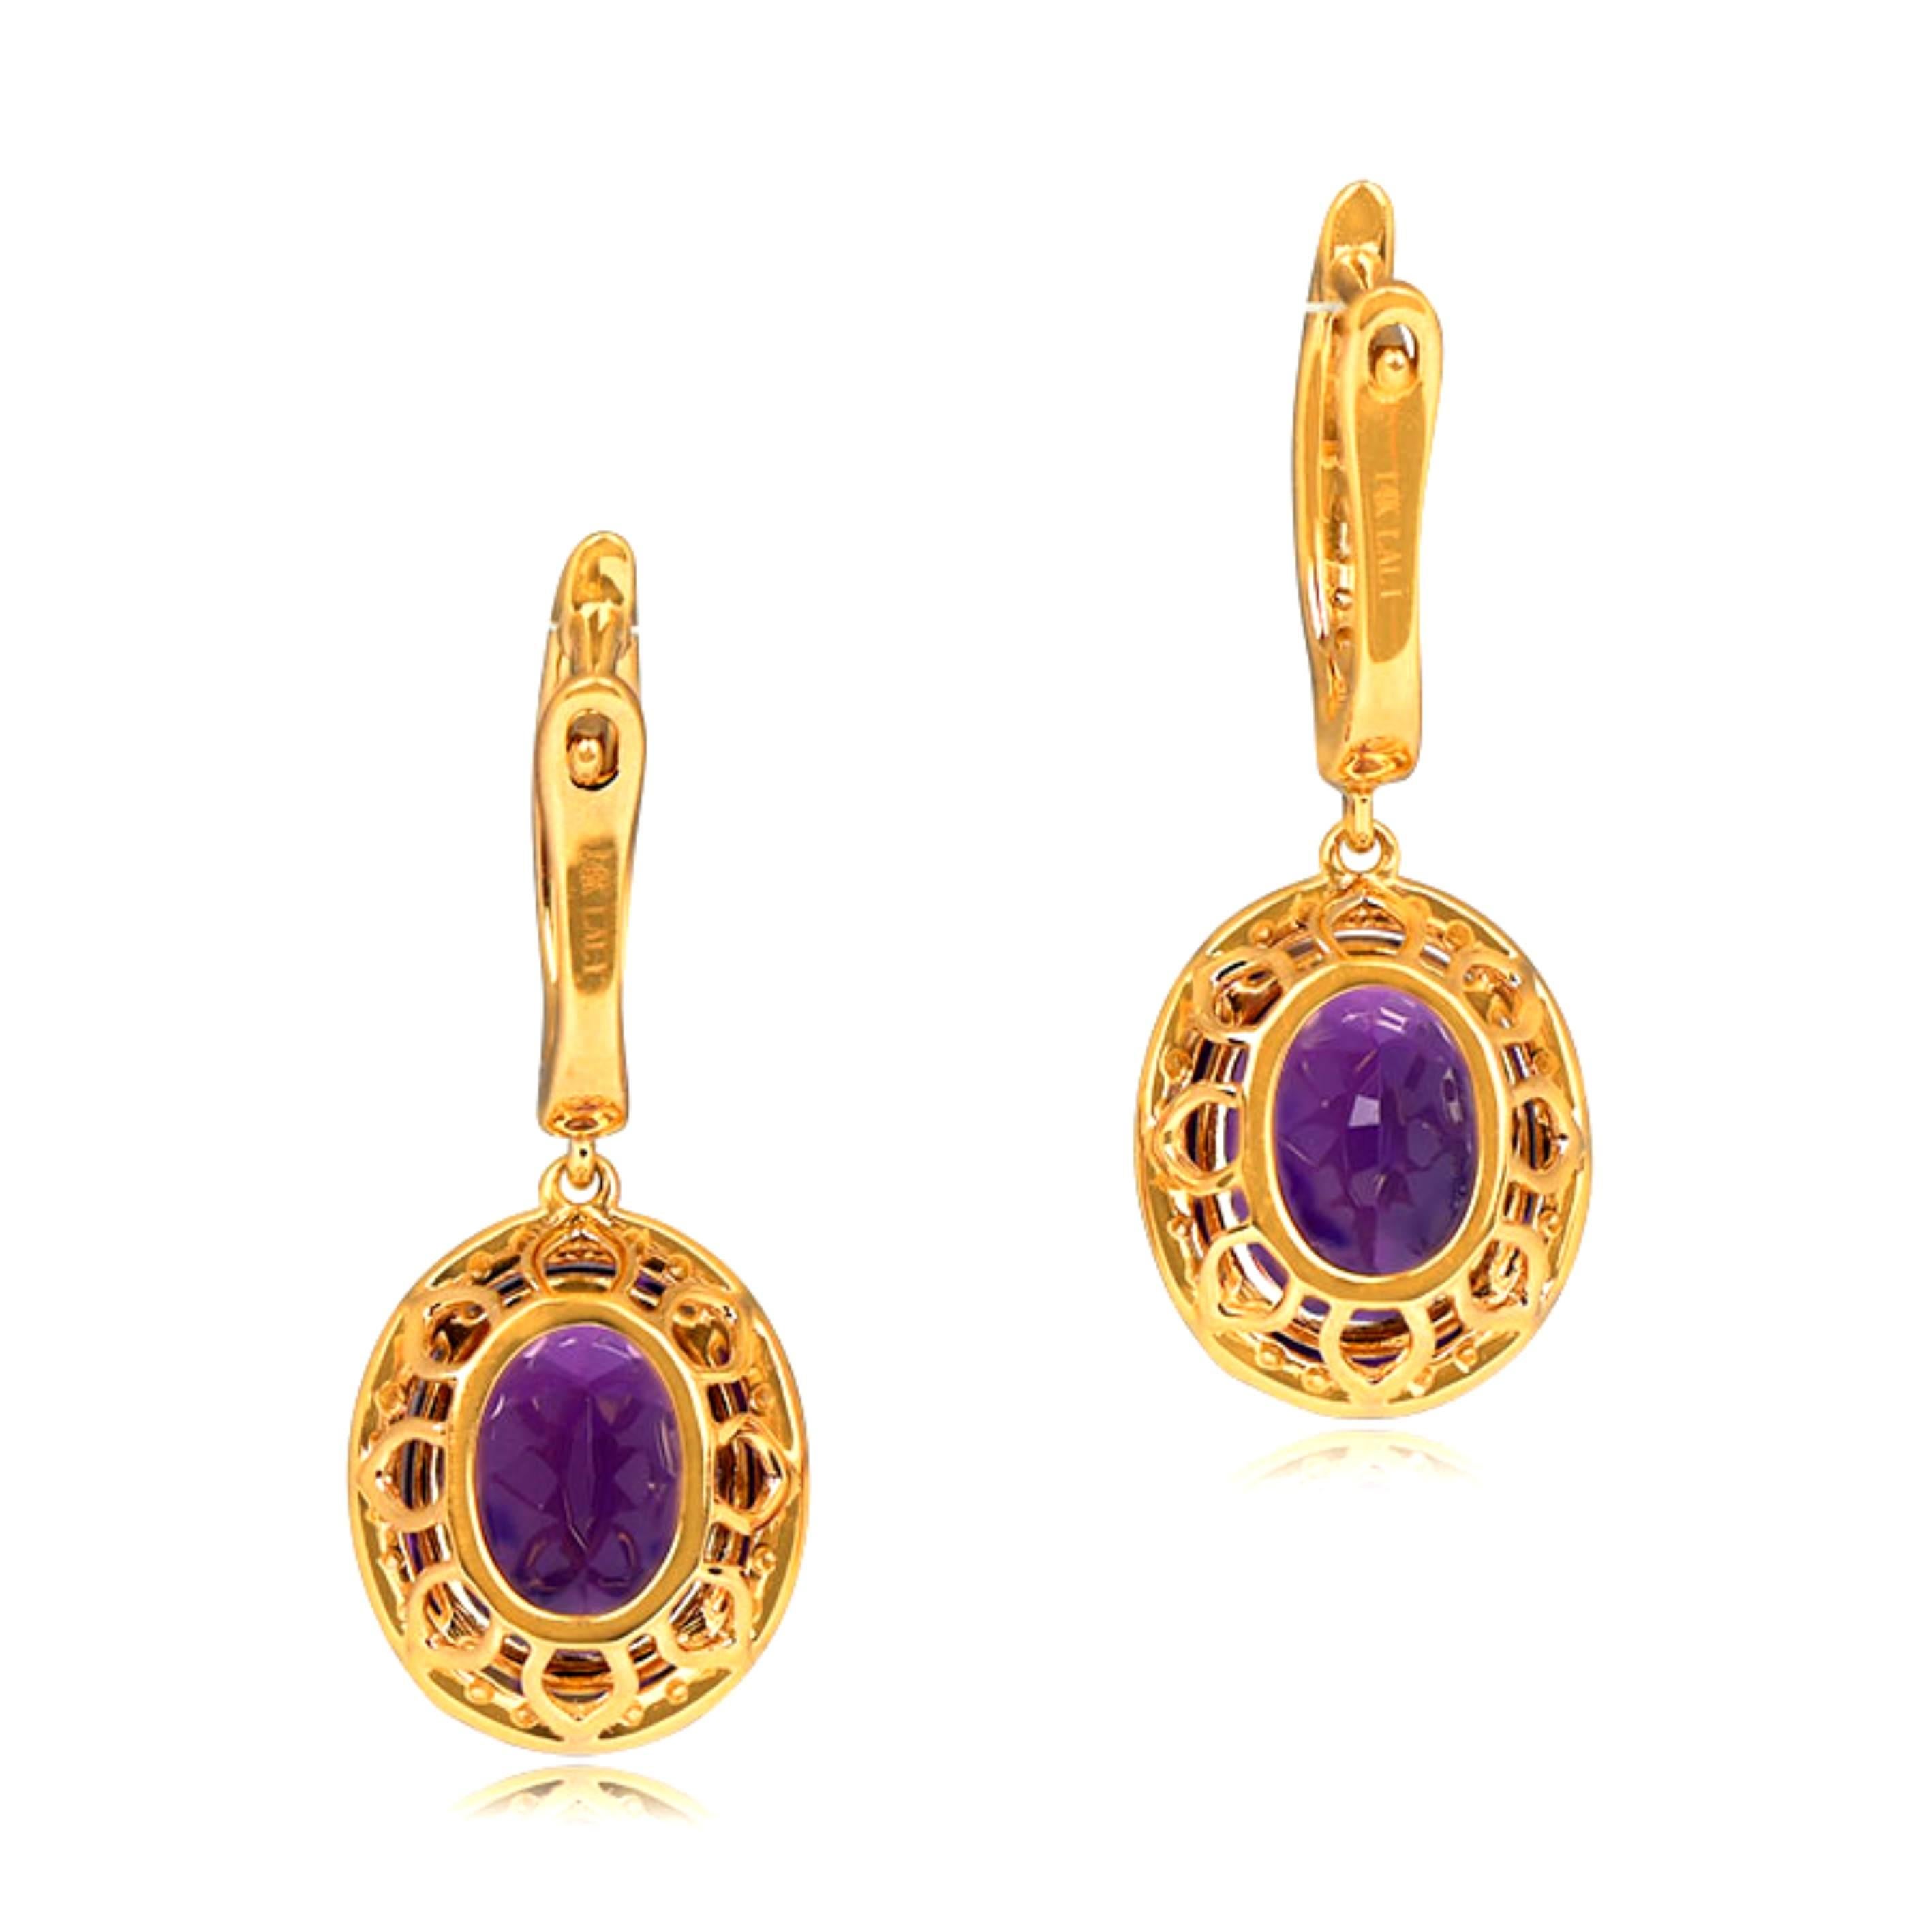 Oval Cut Amethyst Earrings, Diamond Halo, 14k Yellow Gold In Excellent Condition For Sale In New York, NY